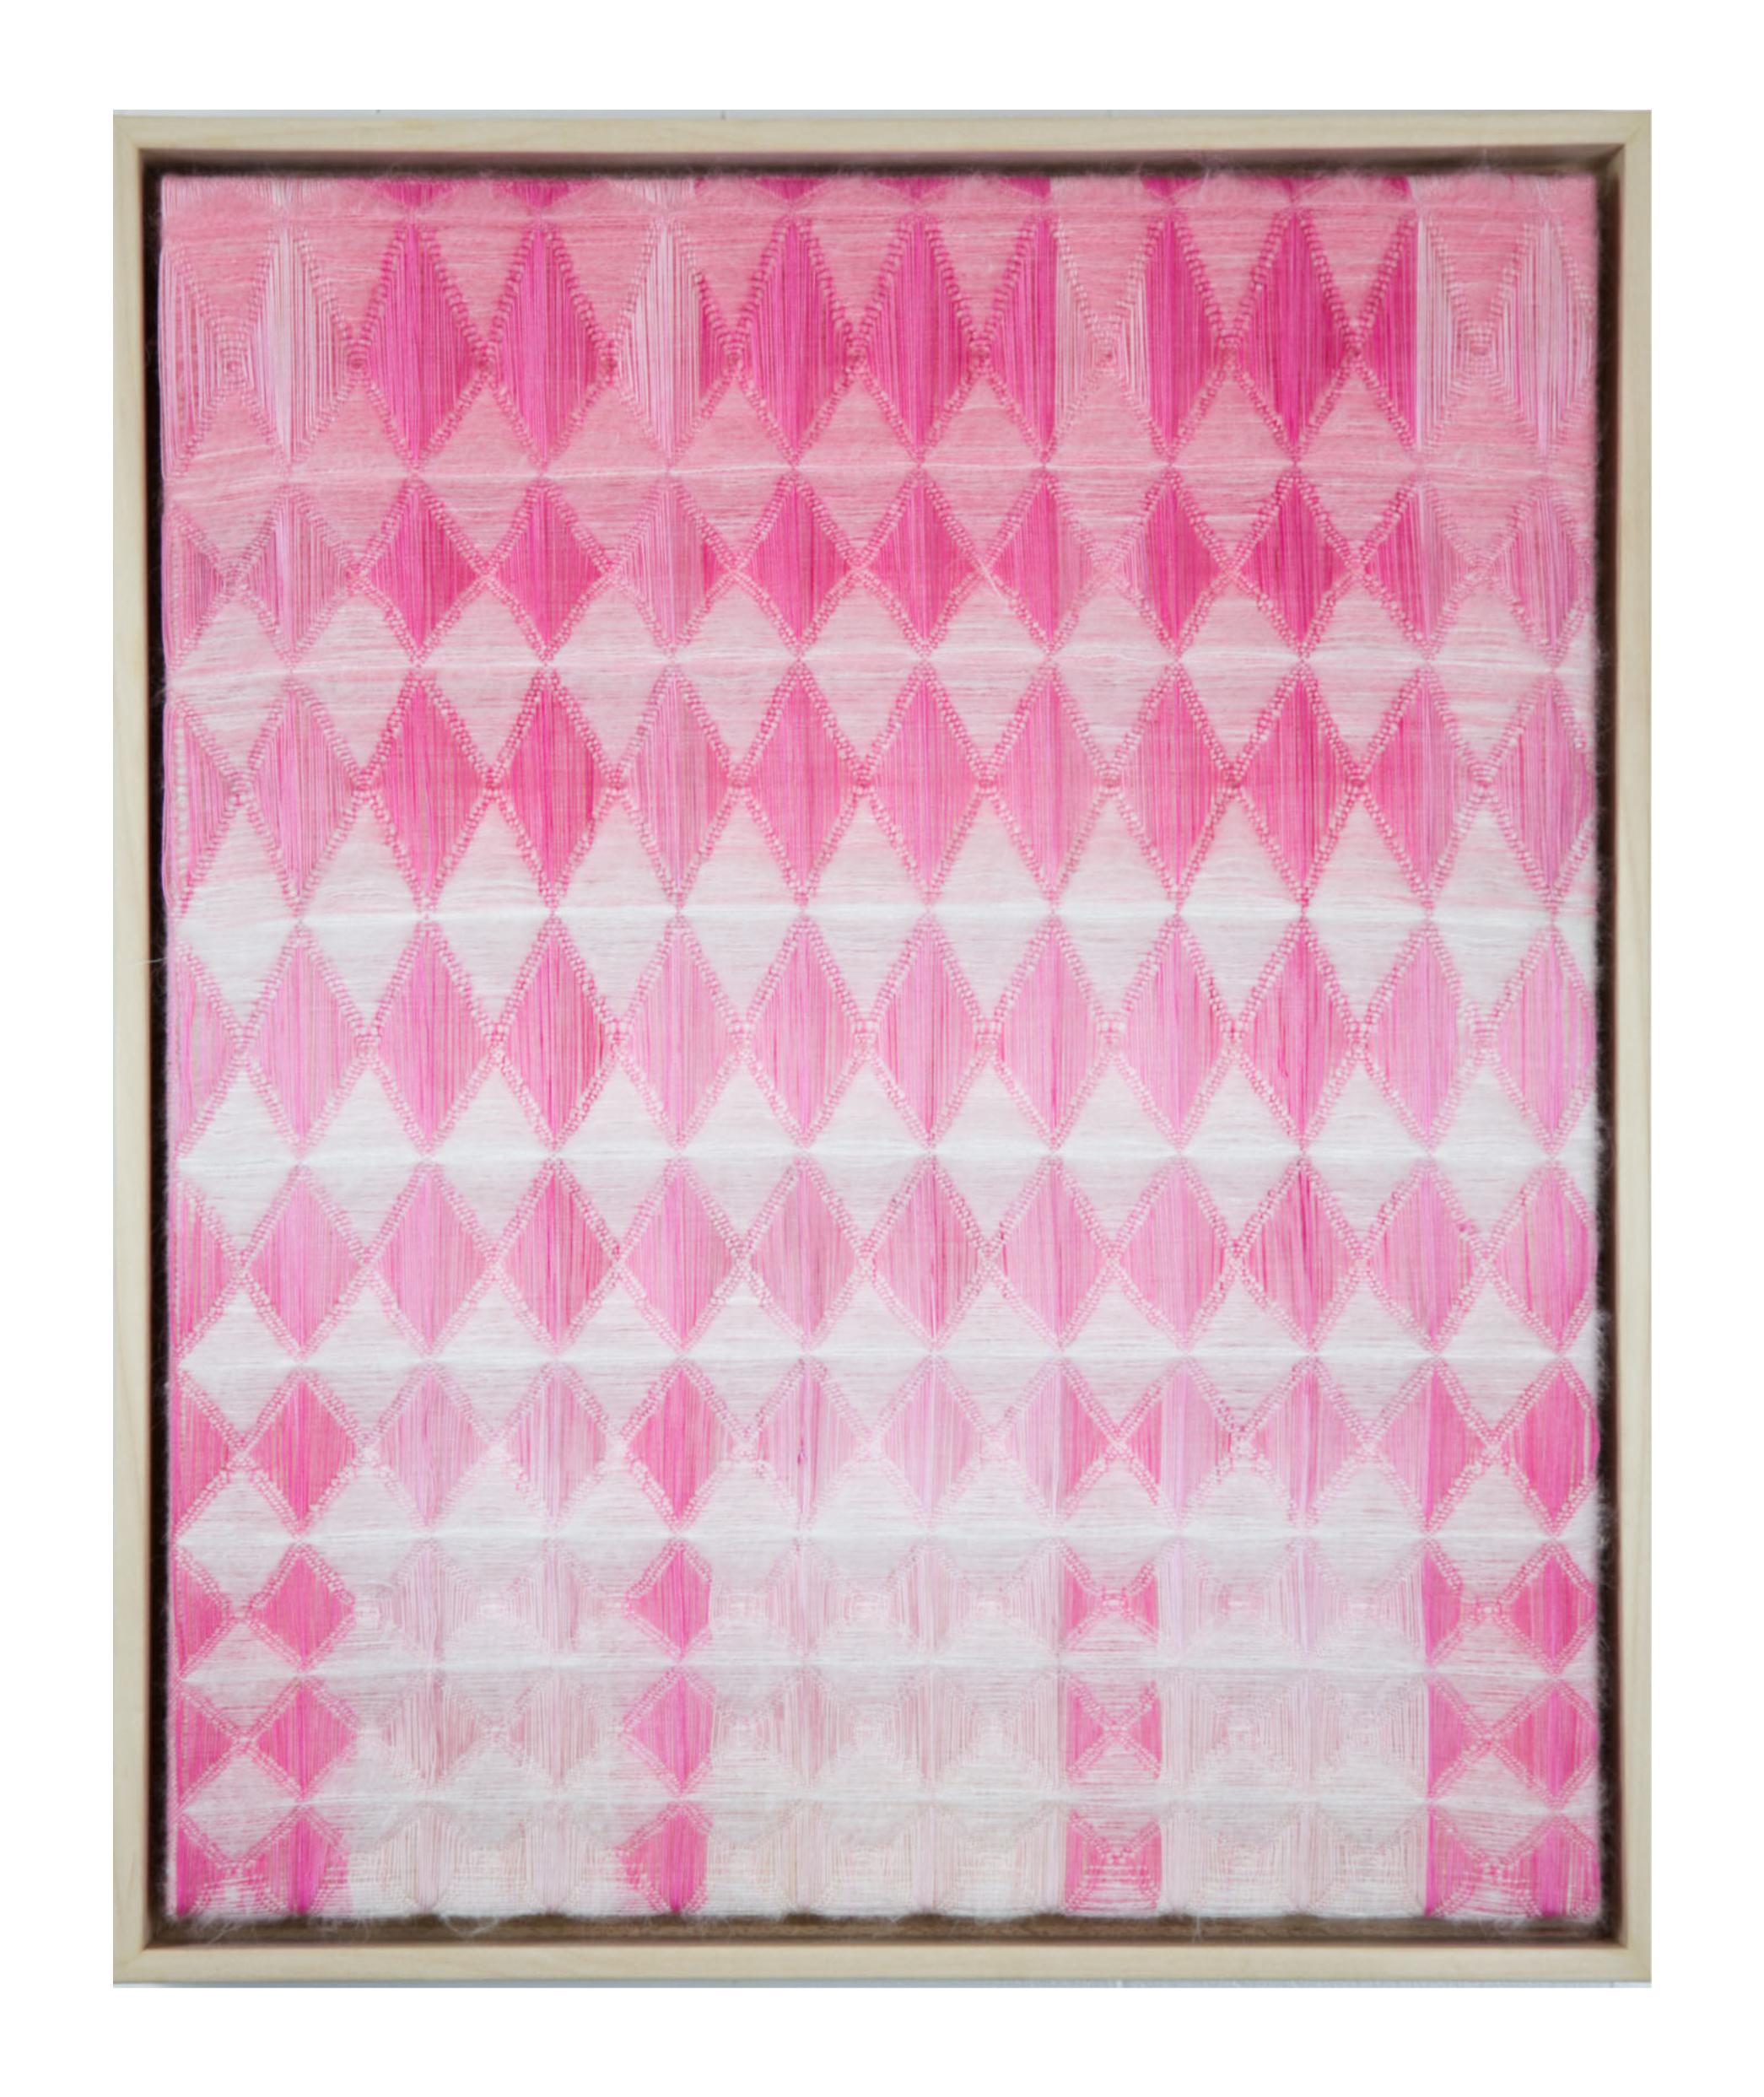 *On view at Ivester Contemporary through May 27th* 

Sweetheart by Anya Molyviatis is a part of an ongoing series of three dimensional textiles that are handwoven on AVL Dobby Looms. The work uses dramatic color gradients as well as physical depth